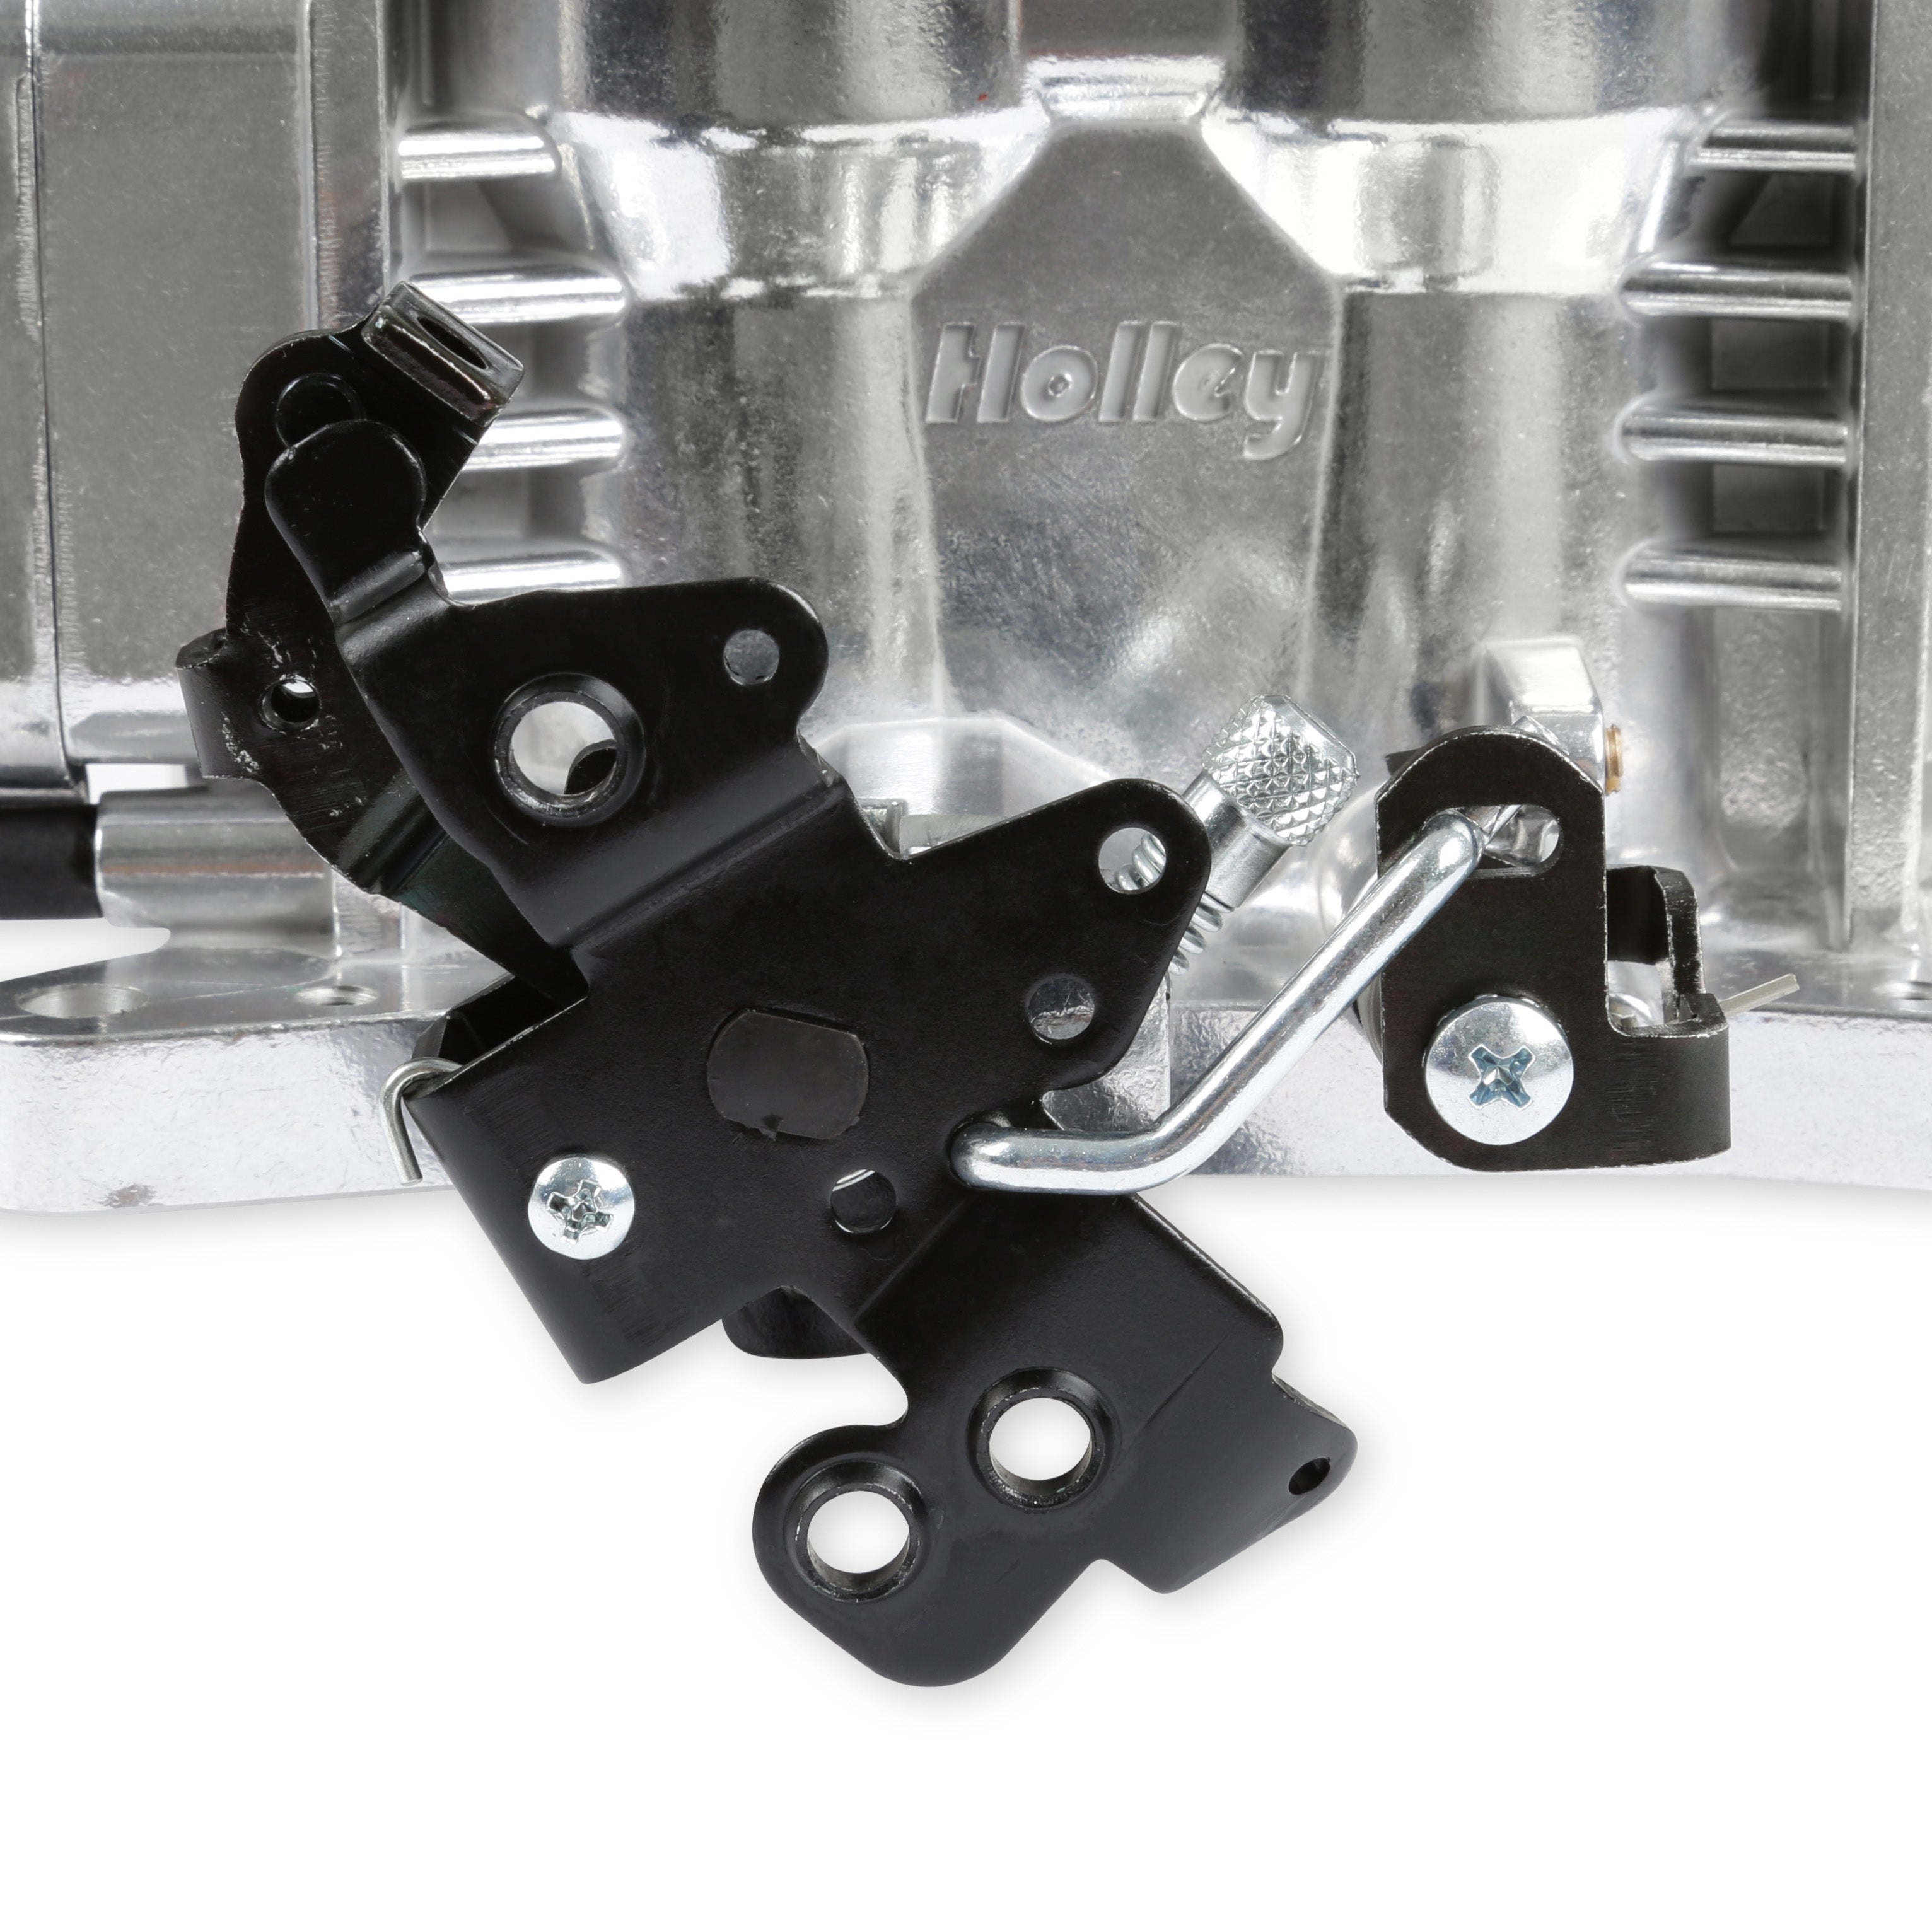 Holley EFI Fuel Injection Throttle Body 534-298